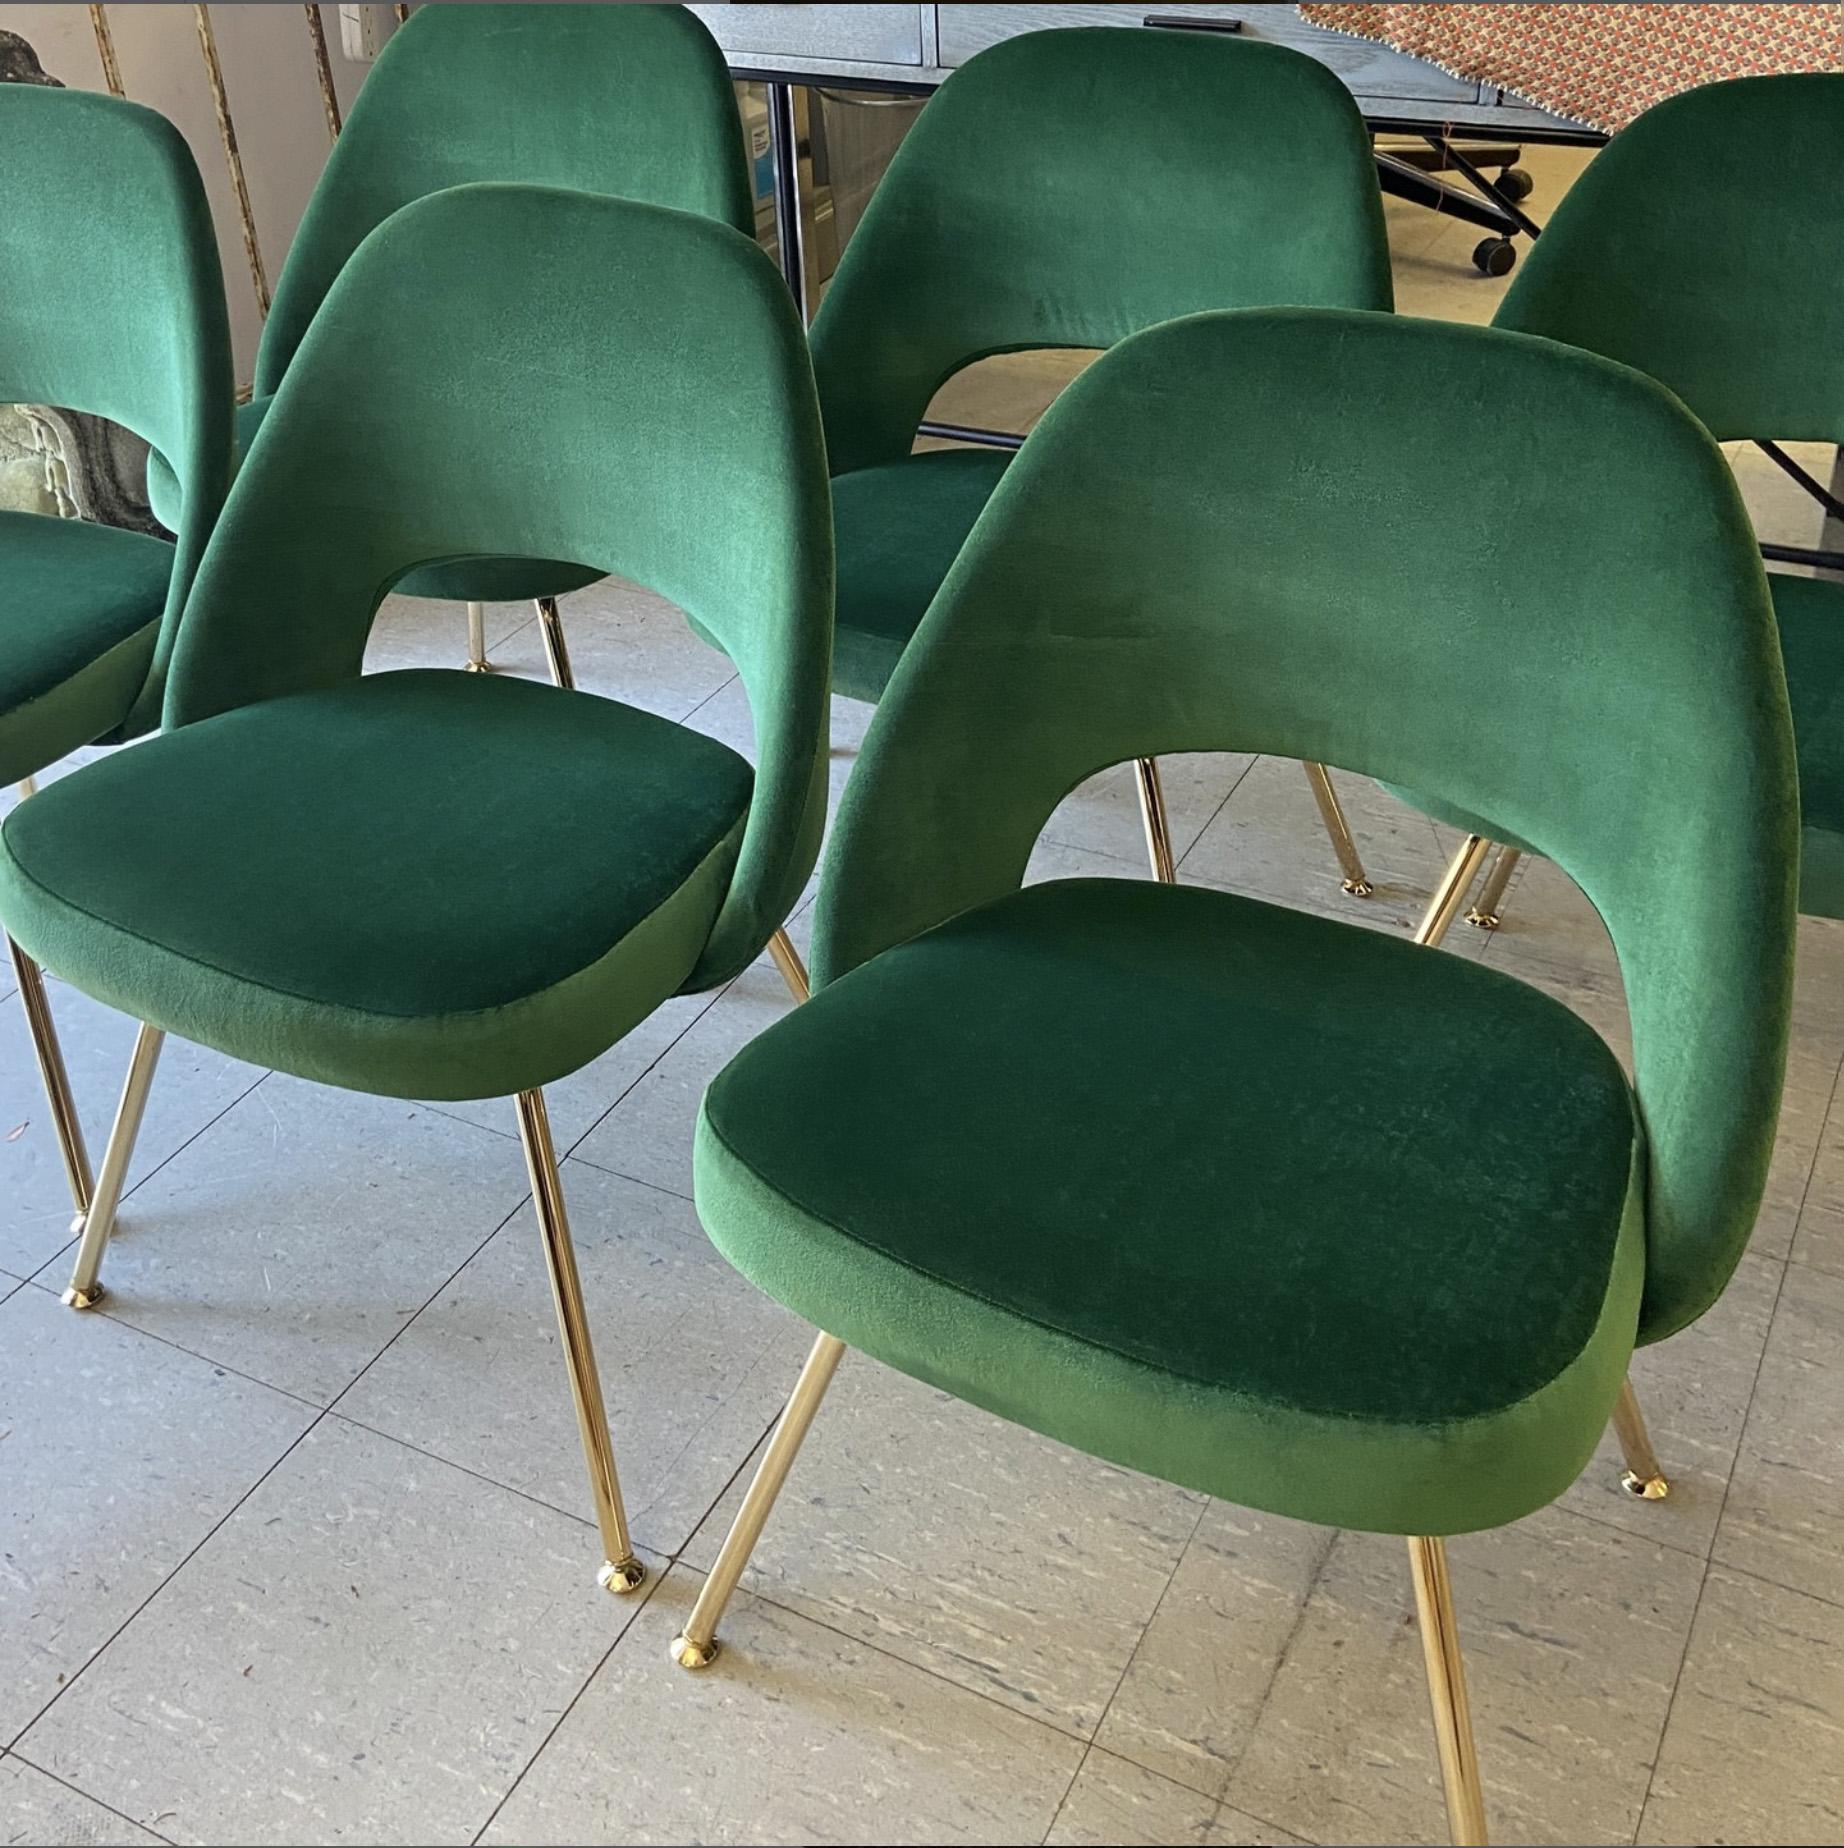 Saarinen Executive Armless Chairs in Emerald Velvet, Gold Edition, Set of 6 In Excellent Condition For Sale In Wilton, CT